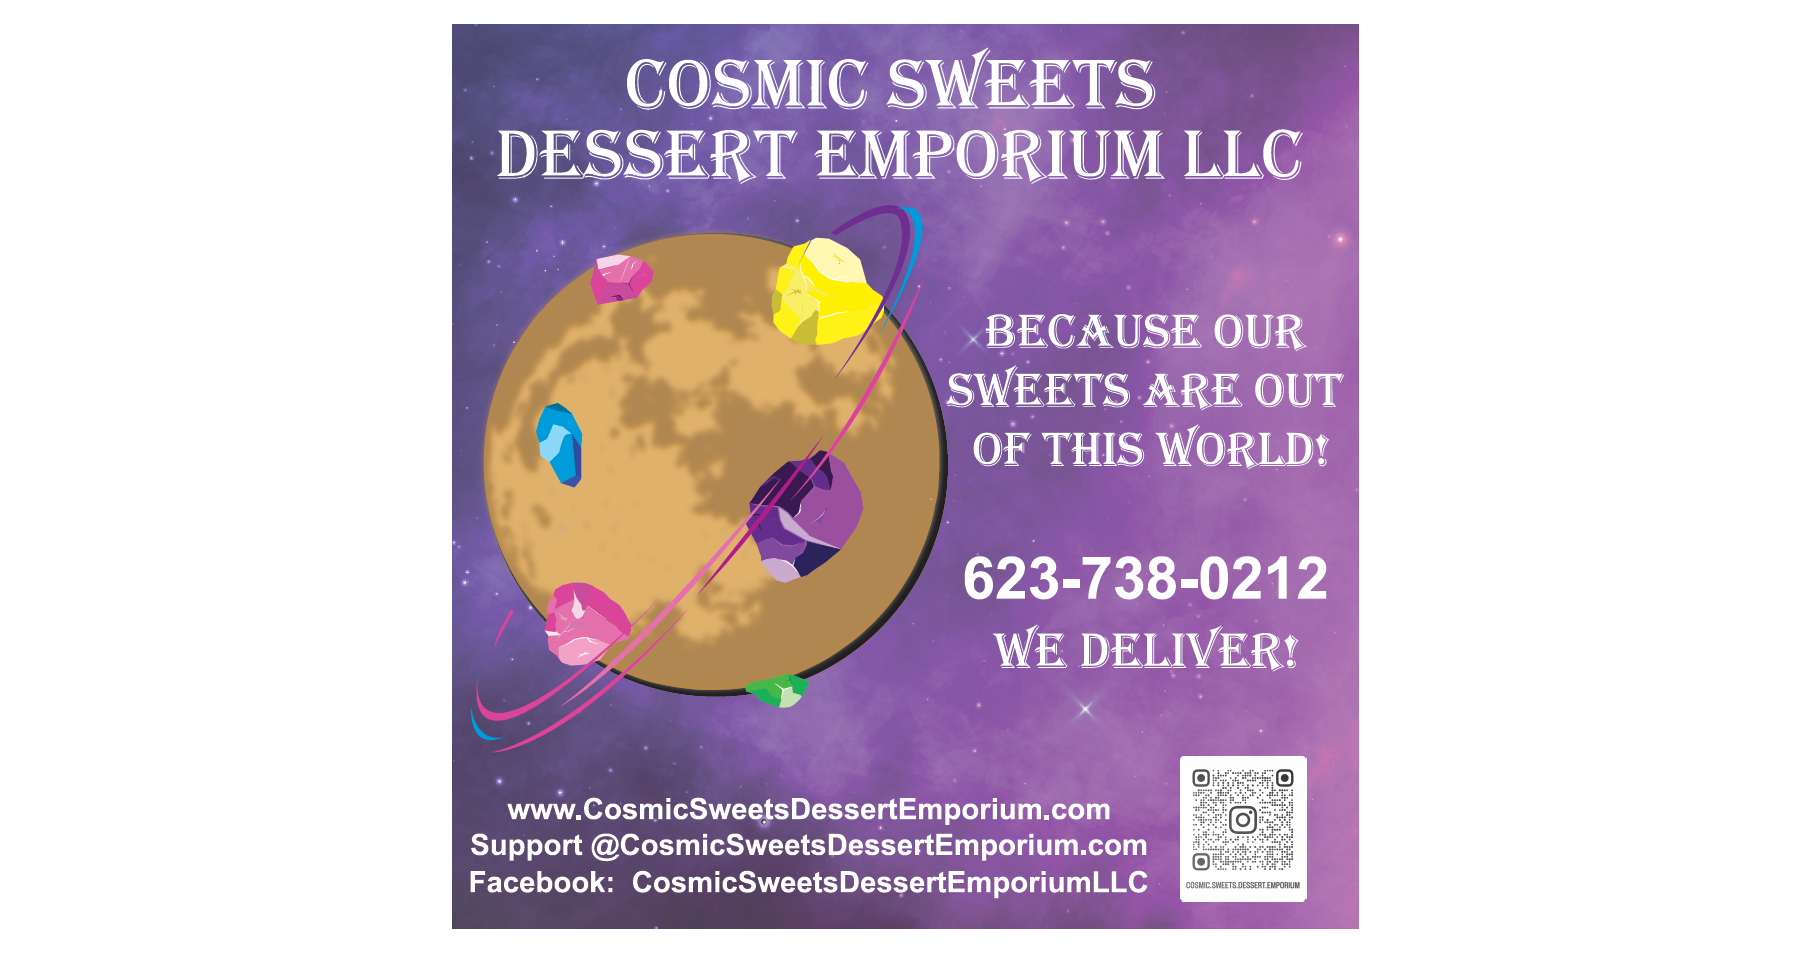 Out of This World Sweets - Cosmic Sweets Dessert Emporium